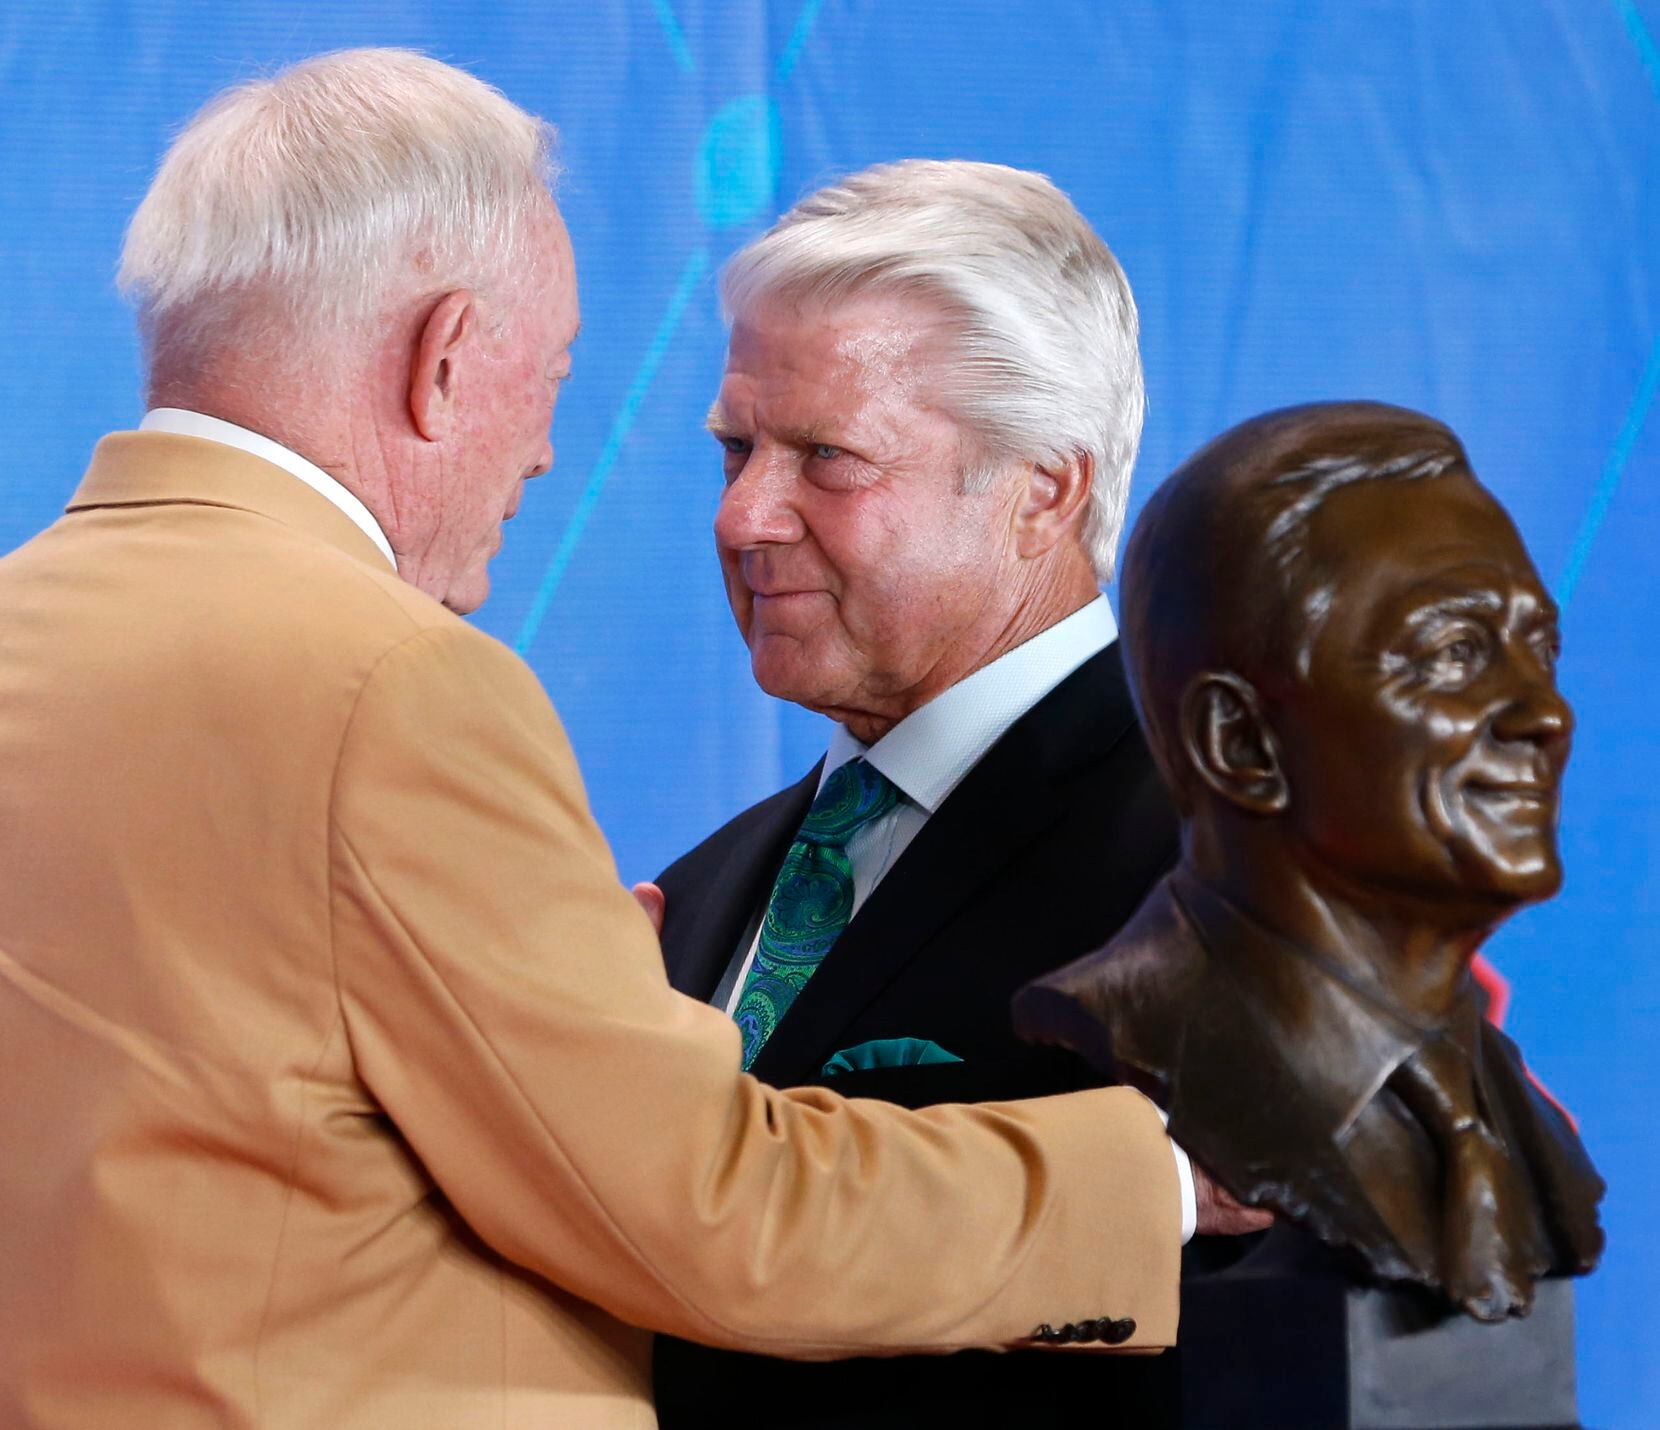 Former Dallas Cowboys head coach Jimmy Johnson listens as 2017 Pro Football Hall of Fame inductee and Dallas Cowboys owner and general manager Jerry Jones talks to him at the 2017 Pro Football Hall of Fame Enshrinement Ceremony at Tom Benson Stadium in Canton, Ohio on Saturday, August 6, 2017.